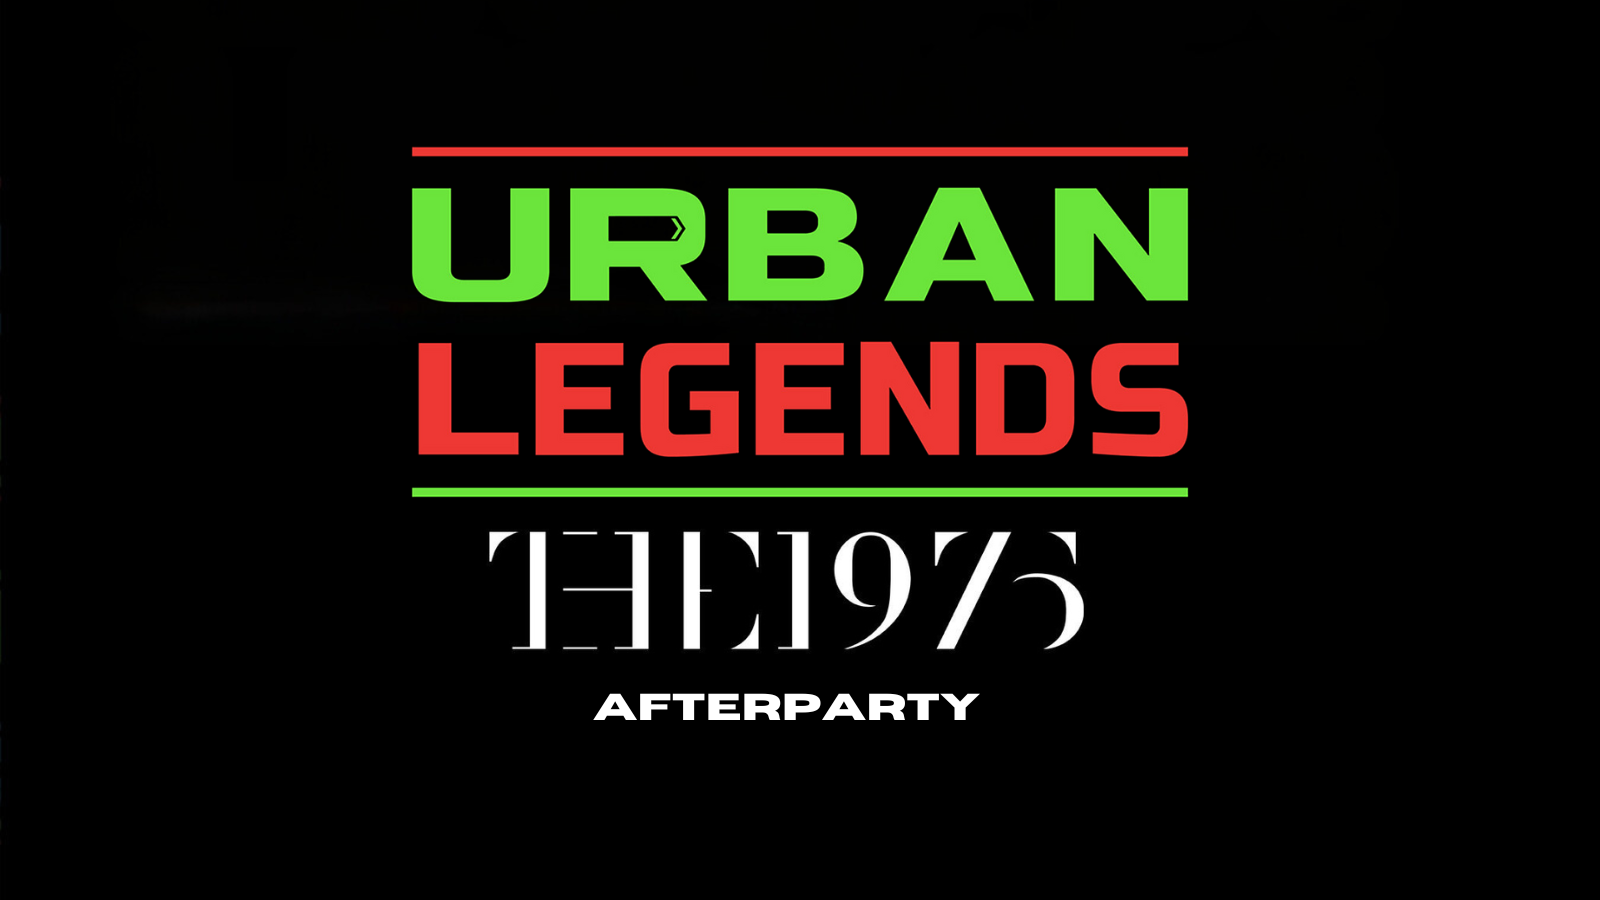 Urban Legends – 1975 After-Party